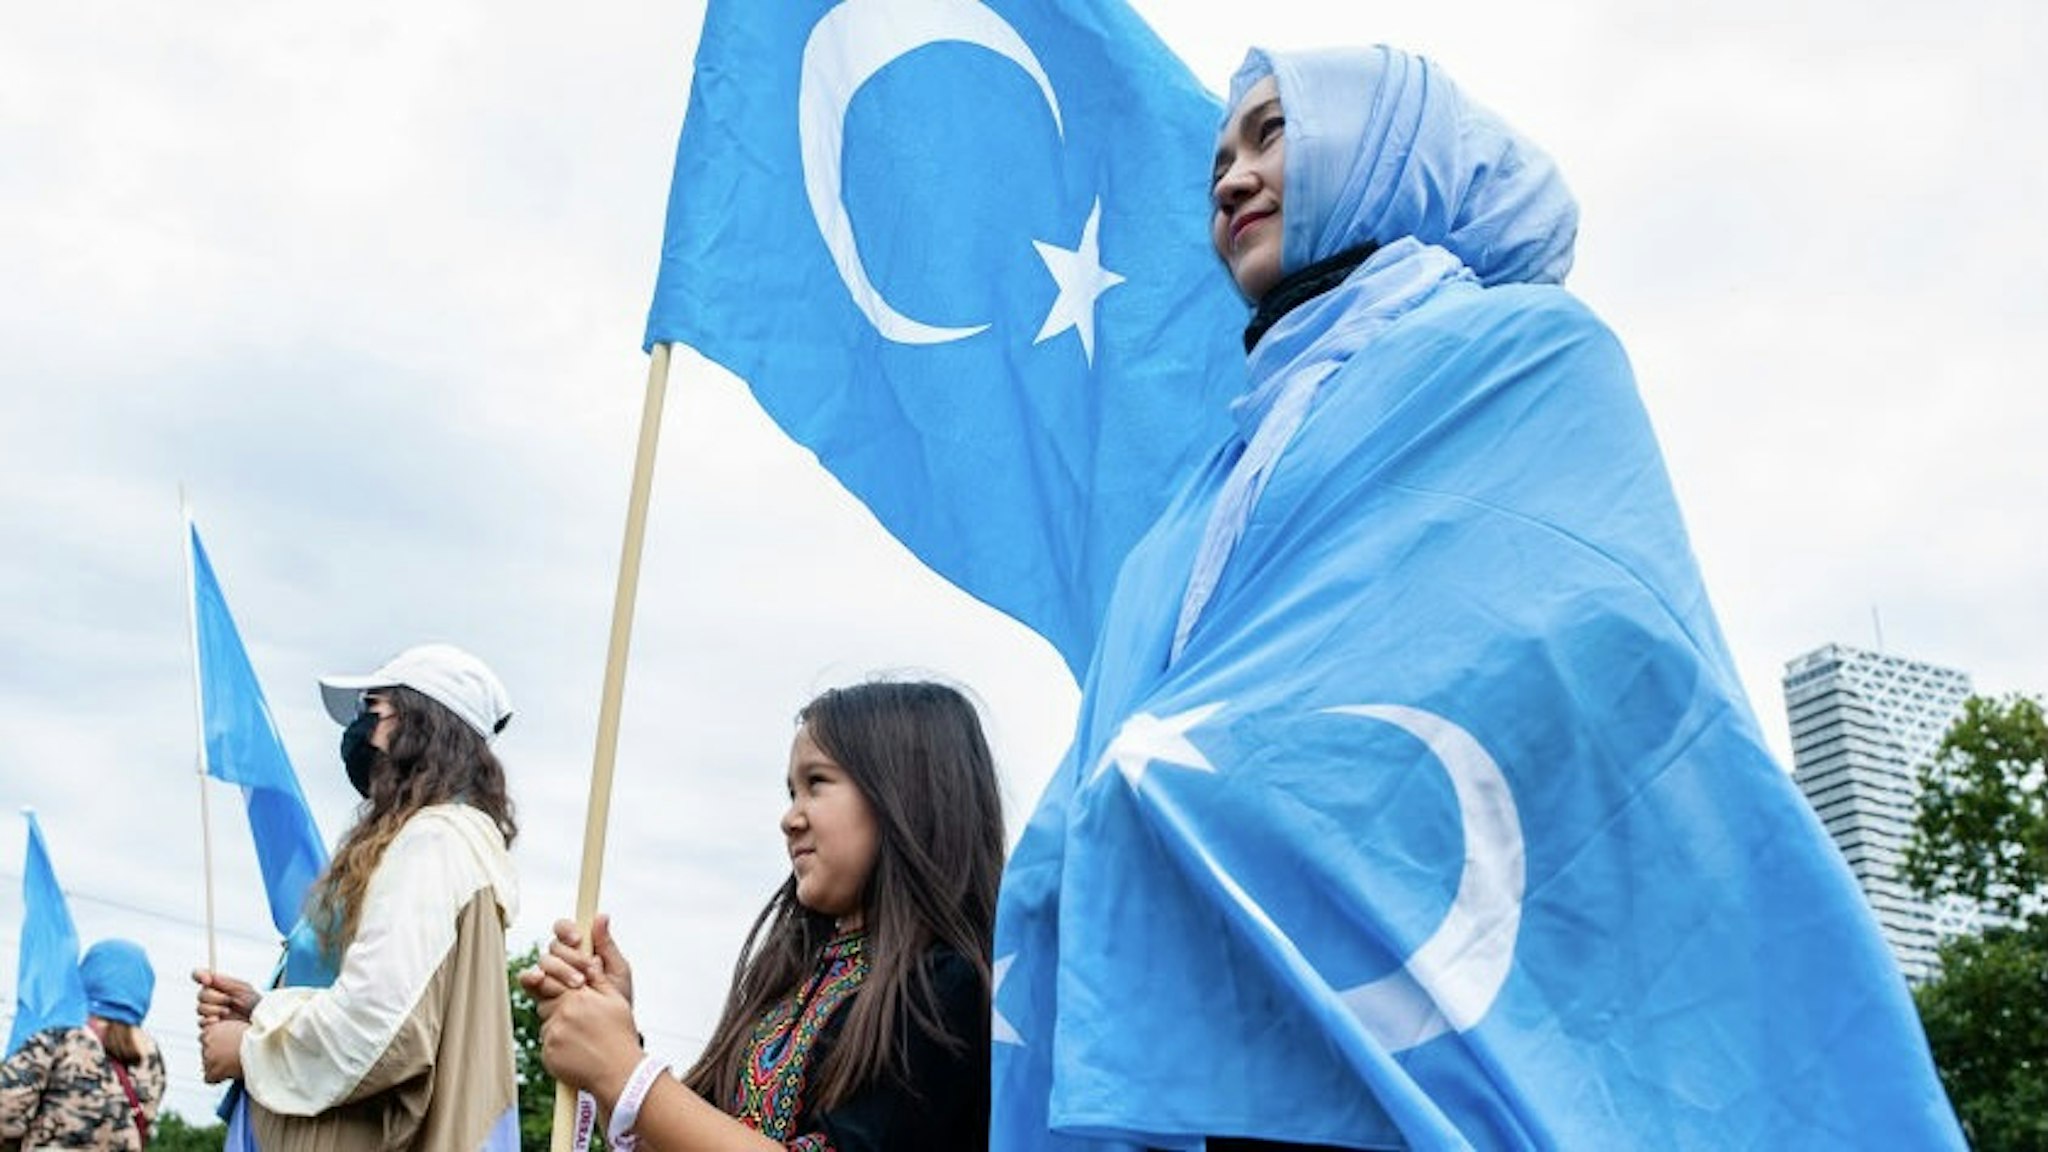 A woman and her daughter are holding Uyghur flags, during the demonstration 'Freedom for Uyghurs' in The Hague, Netherlands on August 20th, 2020. (Photo by Romy Arroyo Fernandez/NurPhoto)